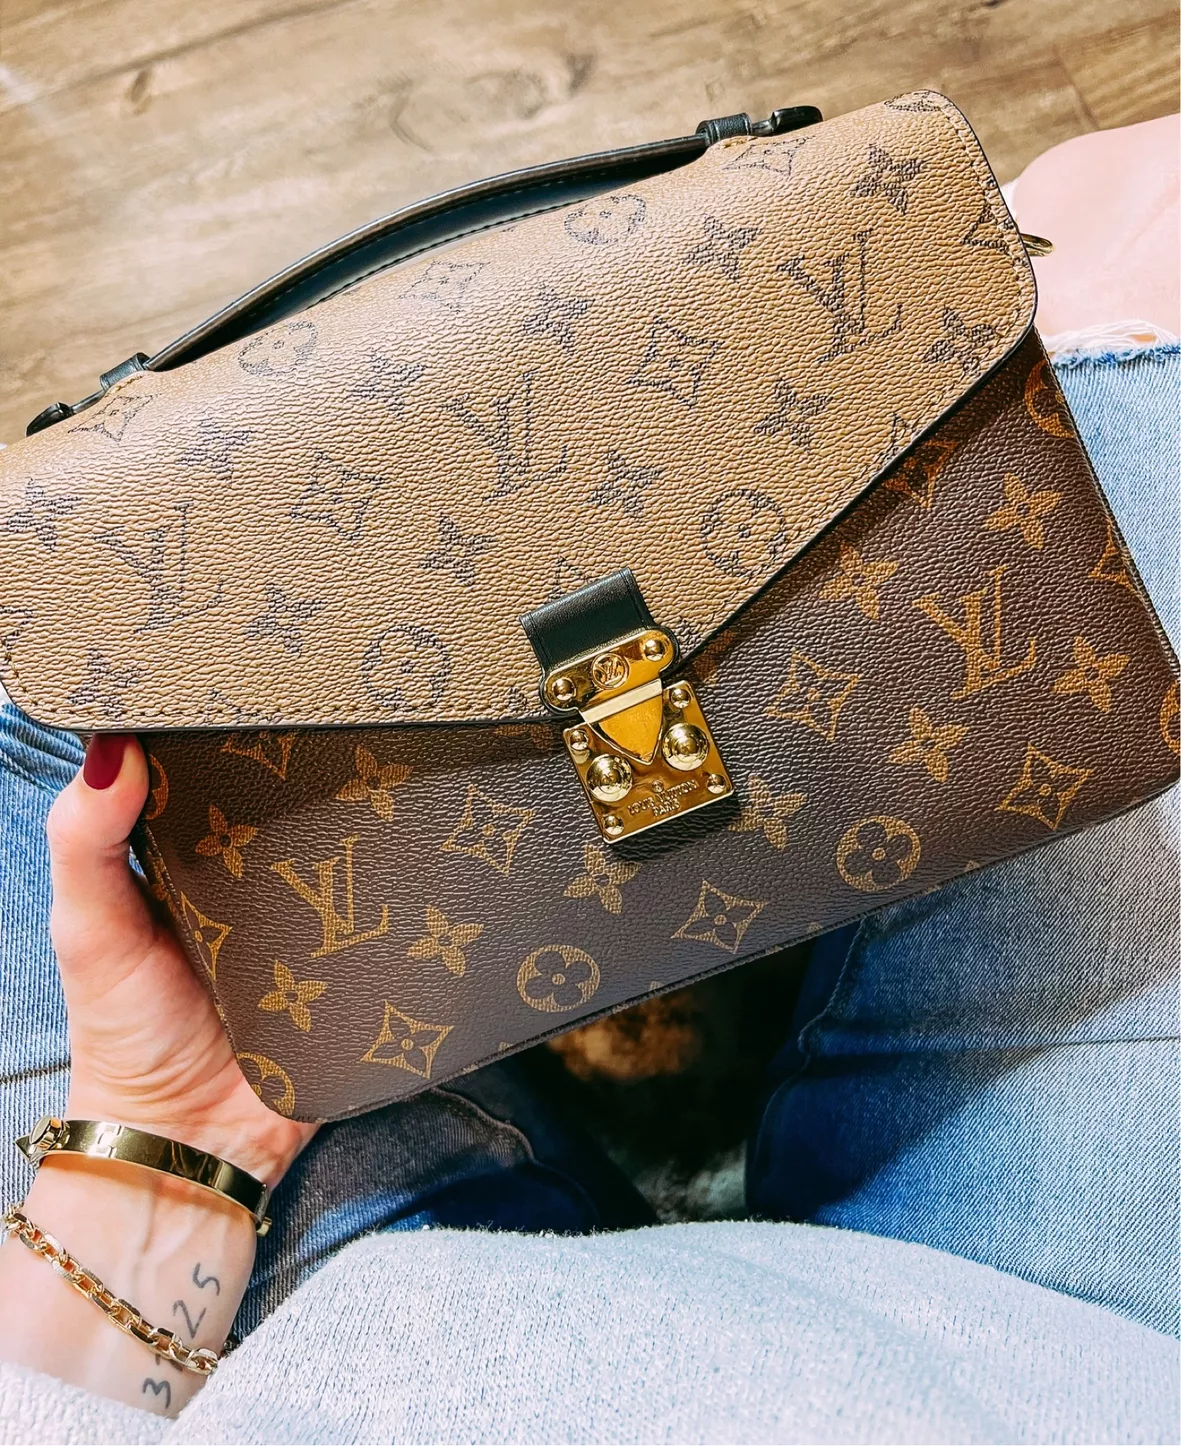 Top DHgate Sellers for Louis Vuitton - We Curate the best 2021